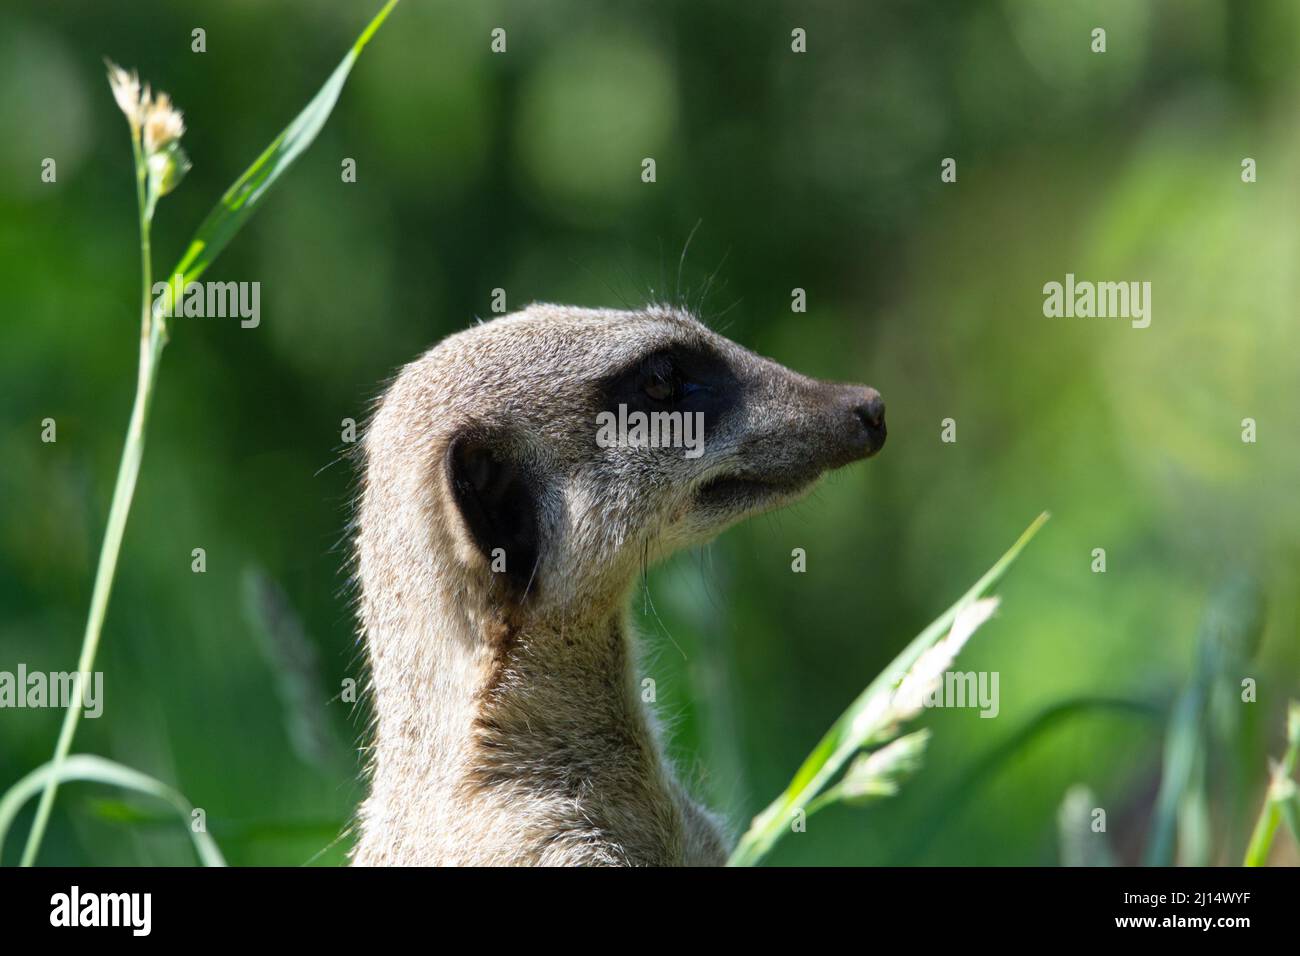 close up o the head and shoulders of a Slender tailed meerkat (Suricata suricatta) with a natural green grass background Stock Photo